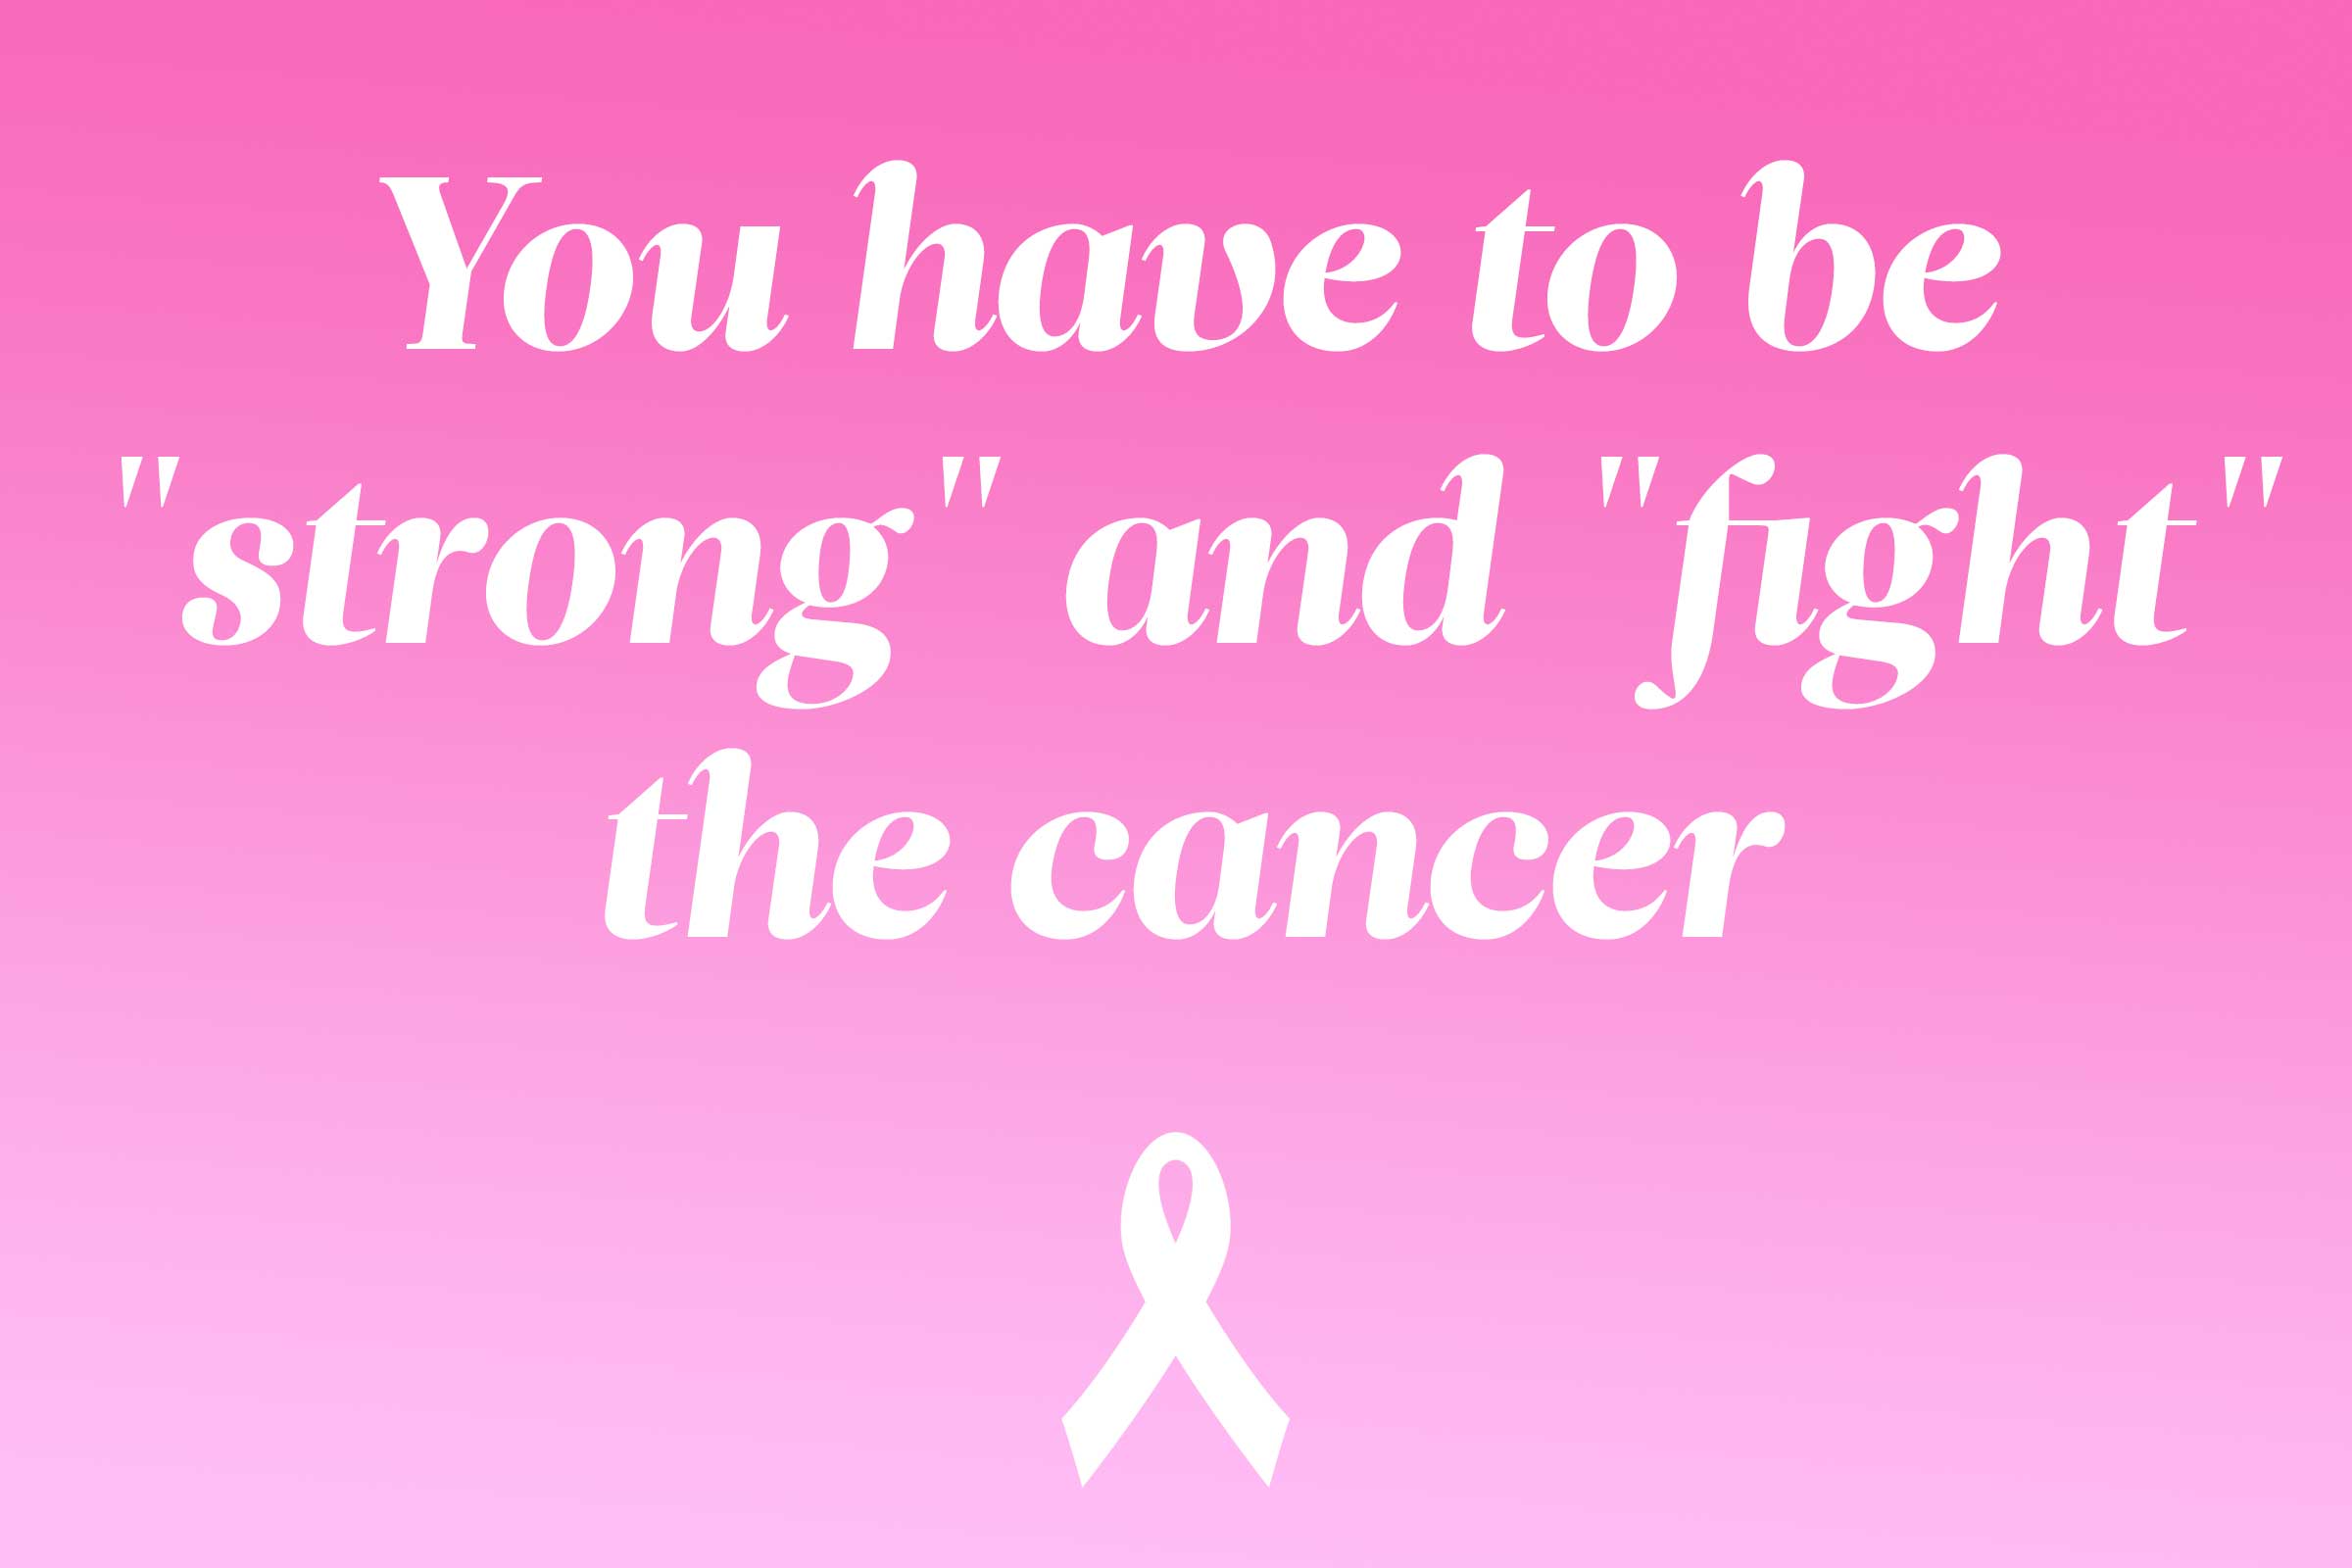 myth: you have to be strong and fight the cancer